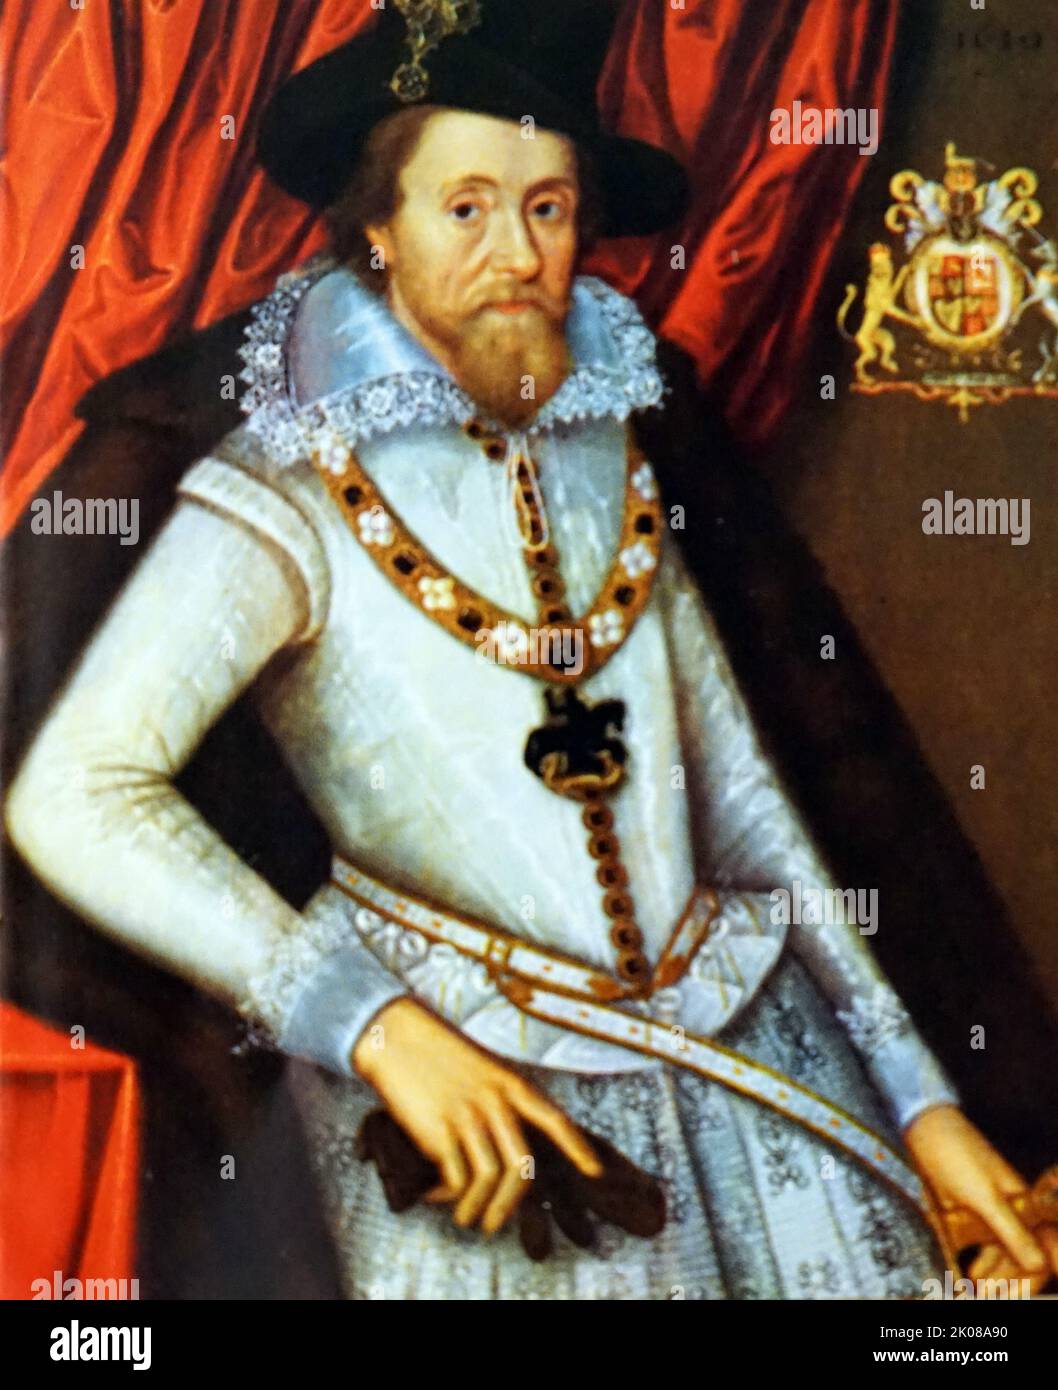 James VI (James Charles Stuart; 19 June 1566 - 27 March 1625) was King of Scotland as James VI from 24 July 1567 and King of England and Ireland as James I from the union of the Scottish and English crowns on 24 March 1603 until his death in 1625 Stock Photo